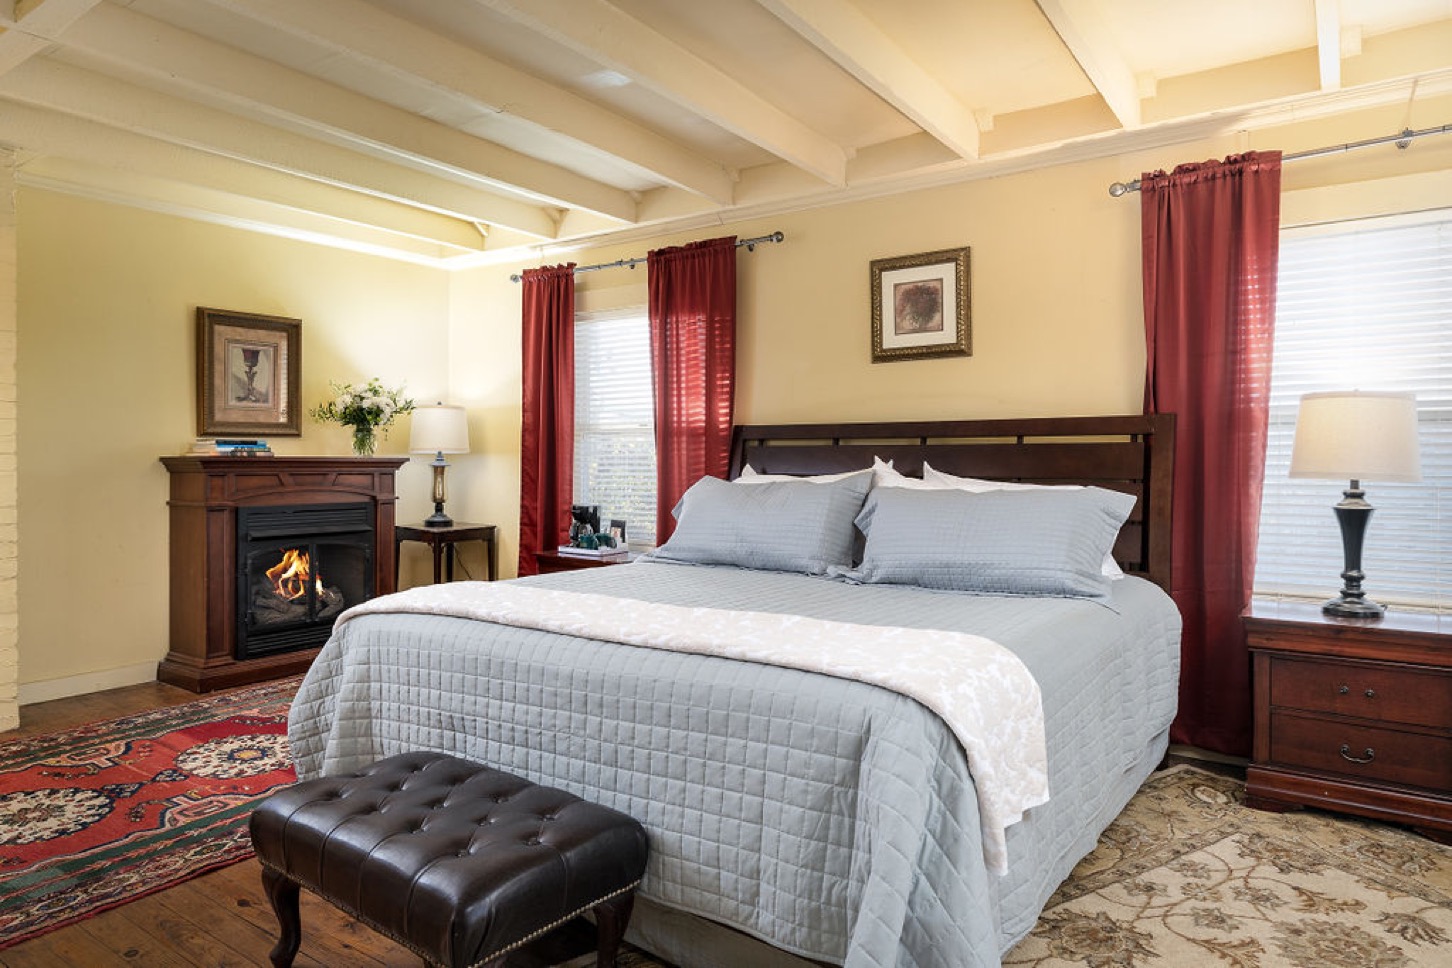 Each guest room at our Virginia bed and breakfast features cozy gas fireplaces